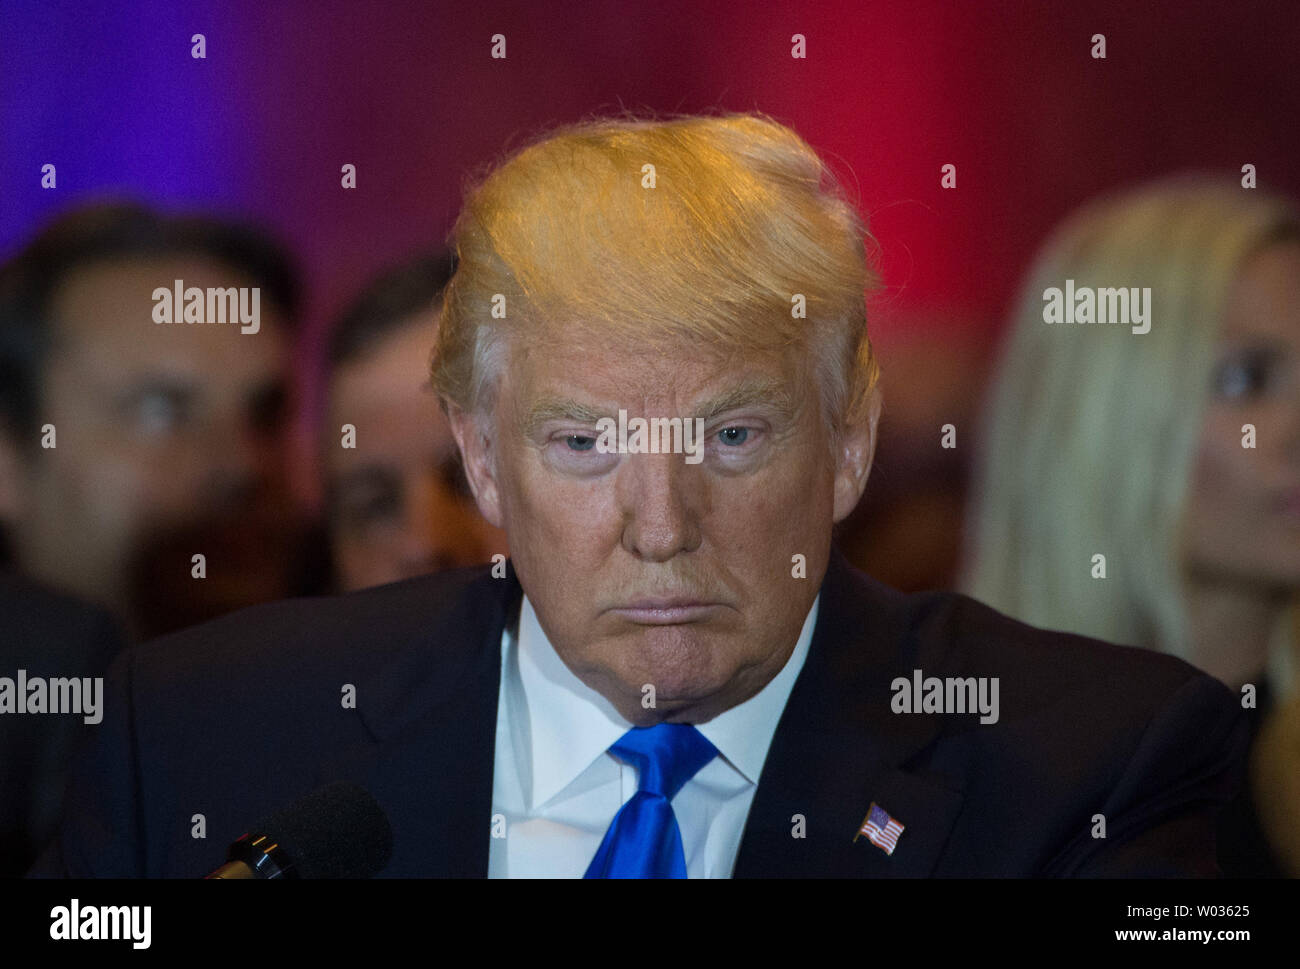 Republican presidential candidate Donald Trump speaks at Trump Tower in New York City after the Connecticut, Delaware, Maryland, Pennsylvania, and Rhode Island primaries on April 26, 2016. Photo by Bryan R. Smith/UPI Stock Photo